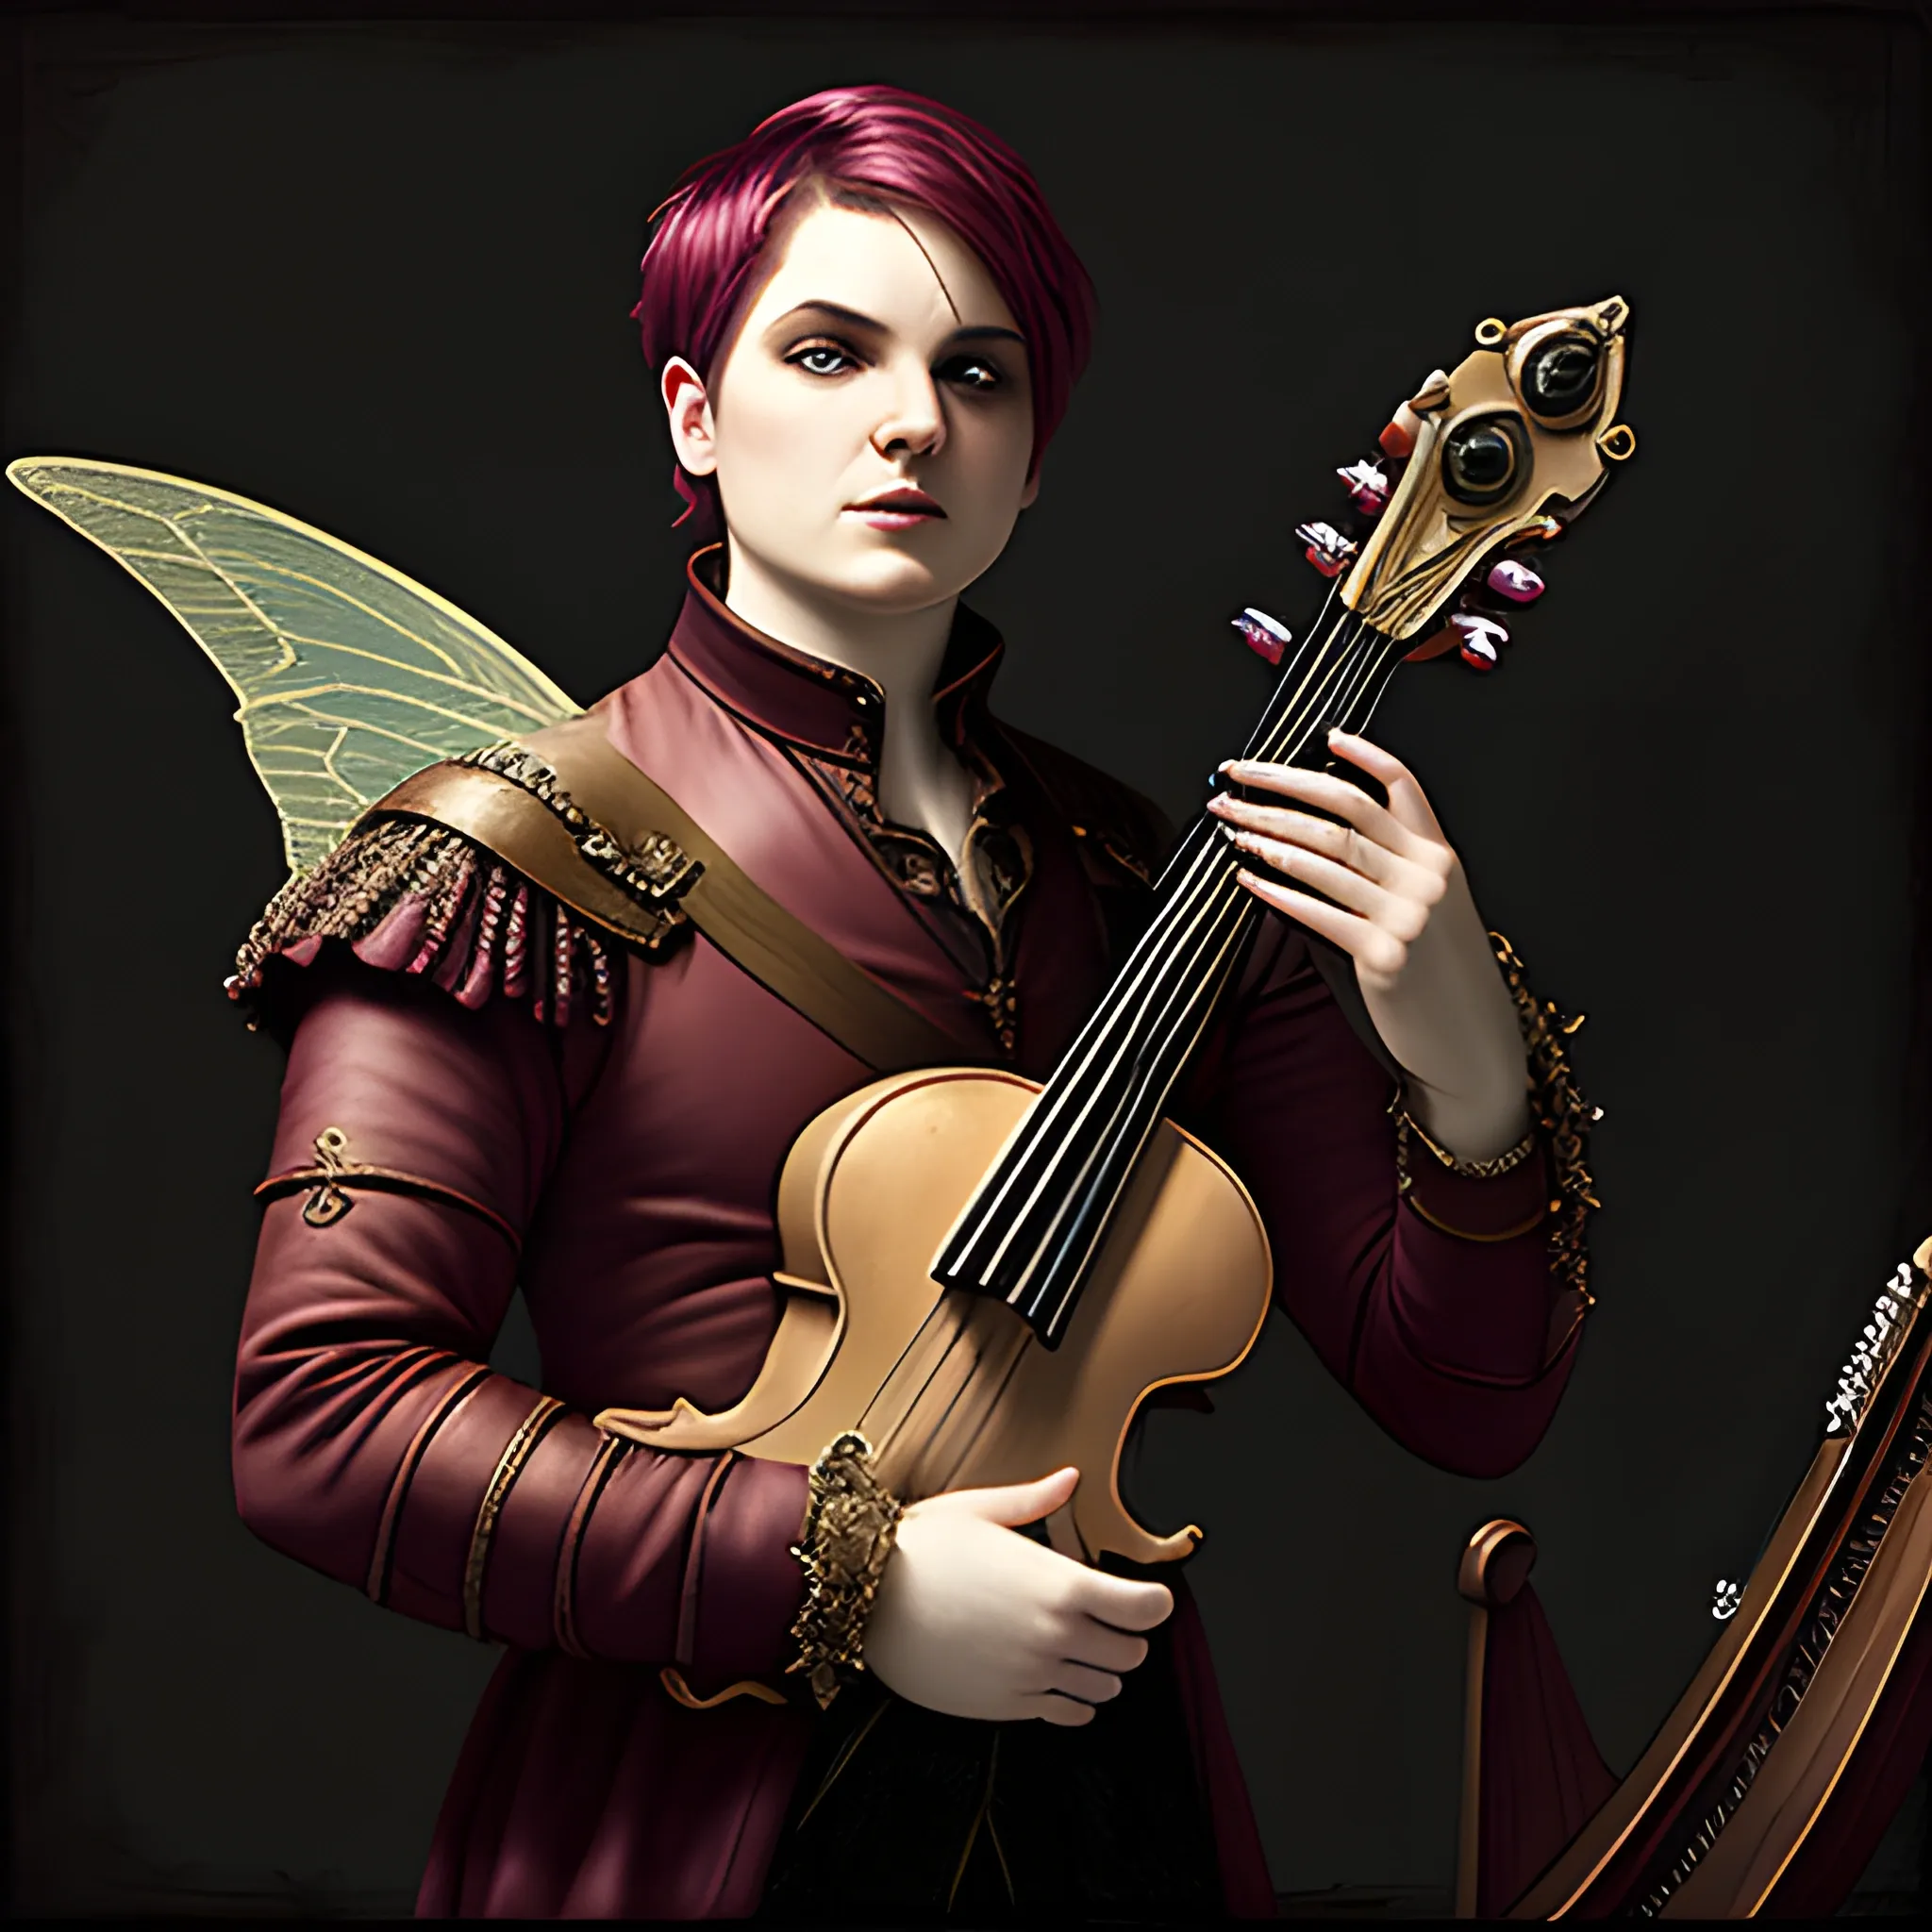 Renaissance painting of Gerard Way as a fantasy fairy, dnd, port ...